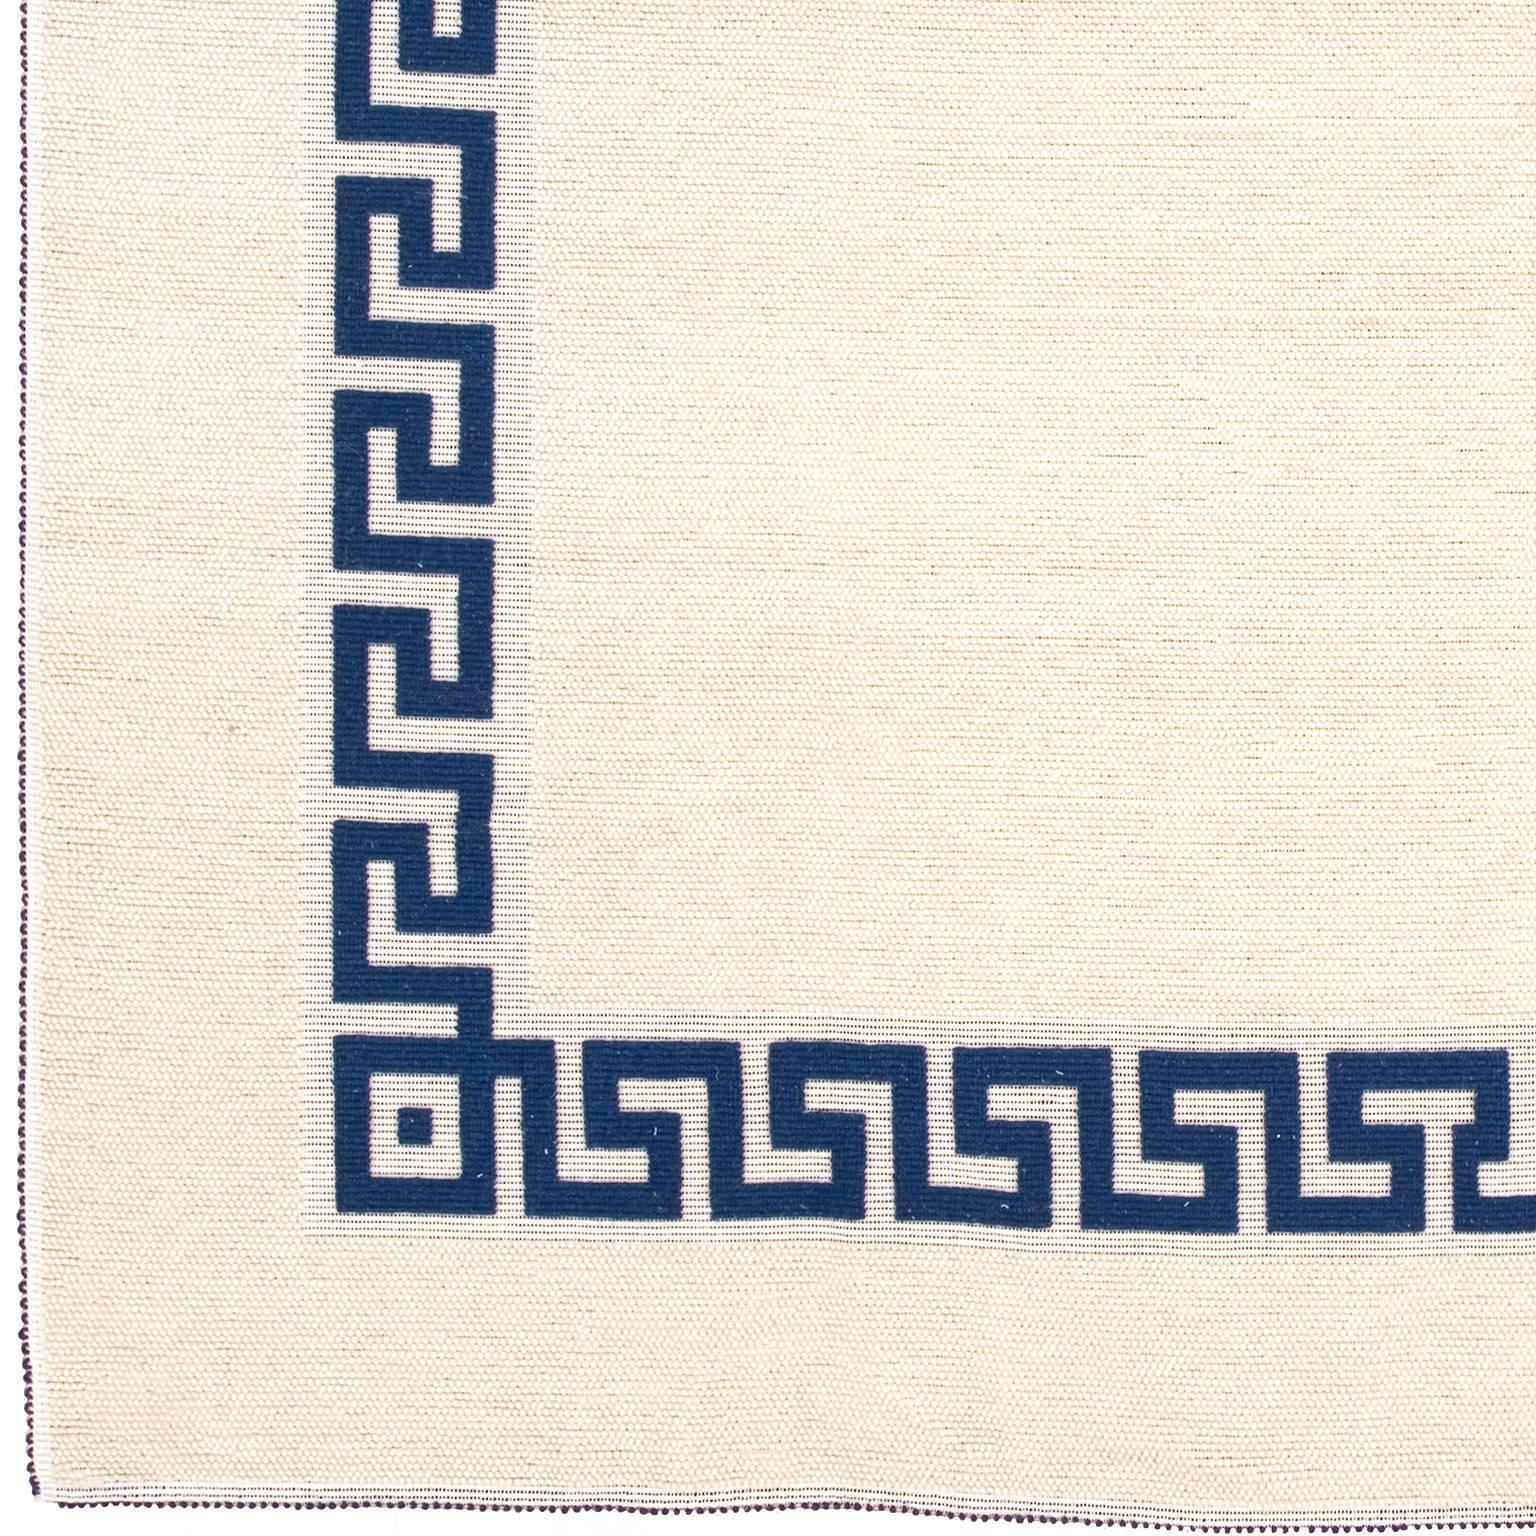 Contemporary Sardinian Carpet
Sardegna, Italy.  
ca. 2009
90 % White and Melange Wool & 10% Cotton

This textile is created with a rice stitch creating Roman / Greek motif.  It embodies the ancient and handcrafted artistic tradition of the island of